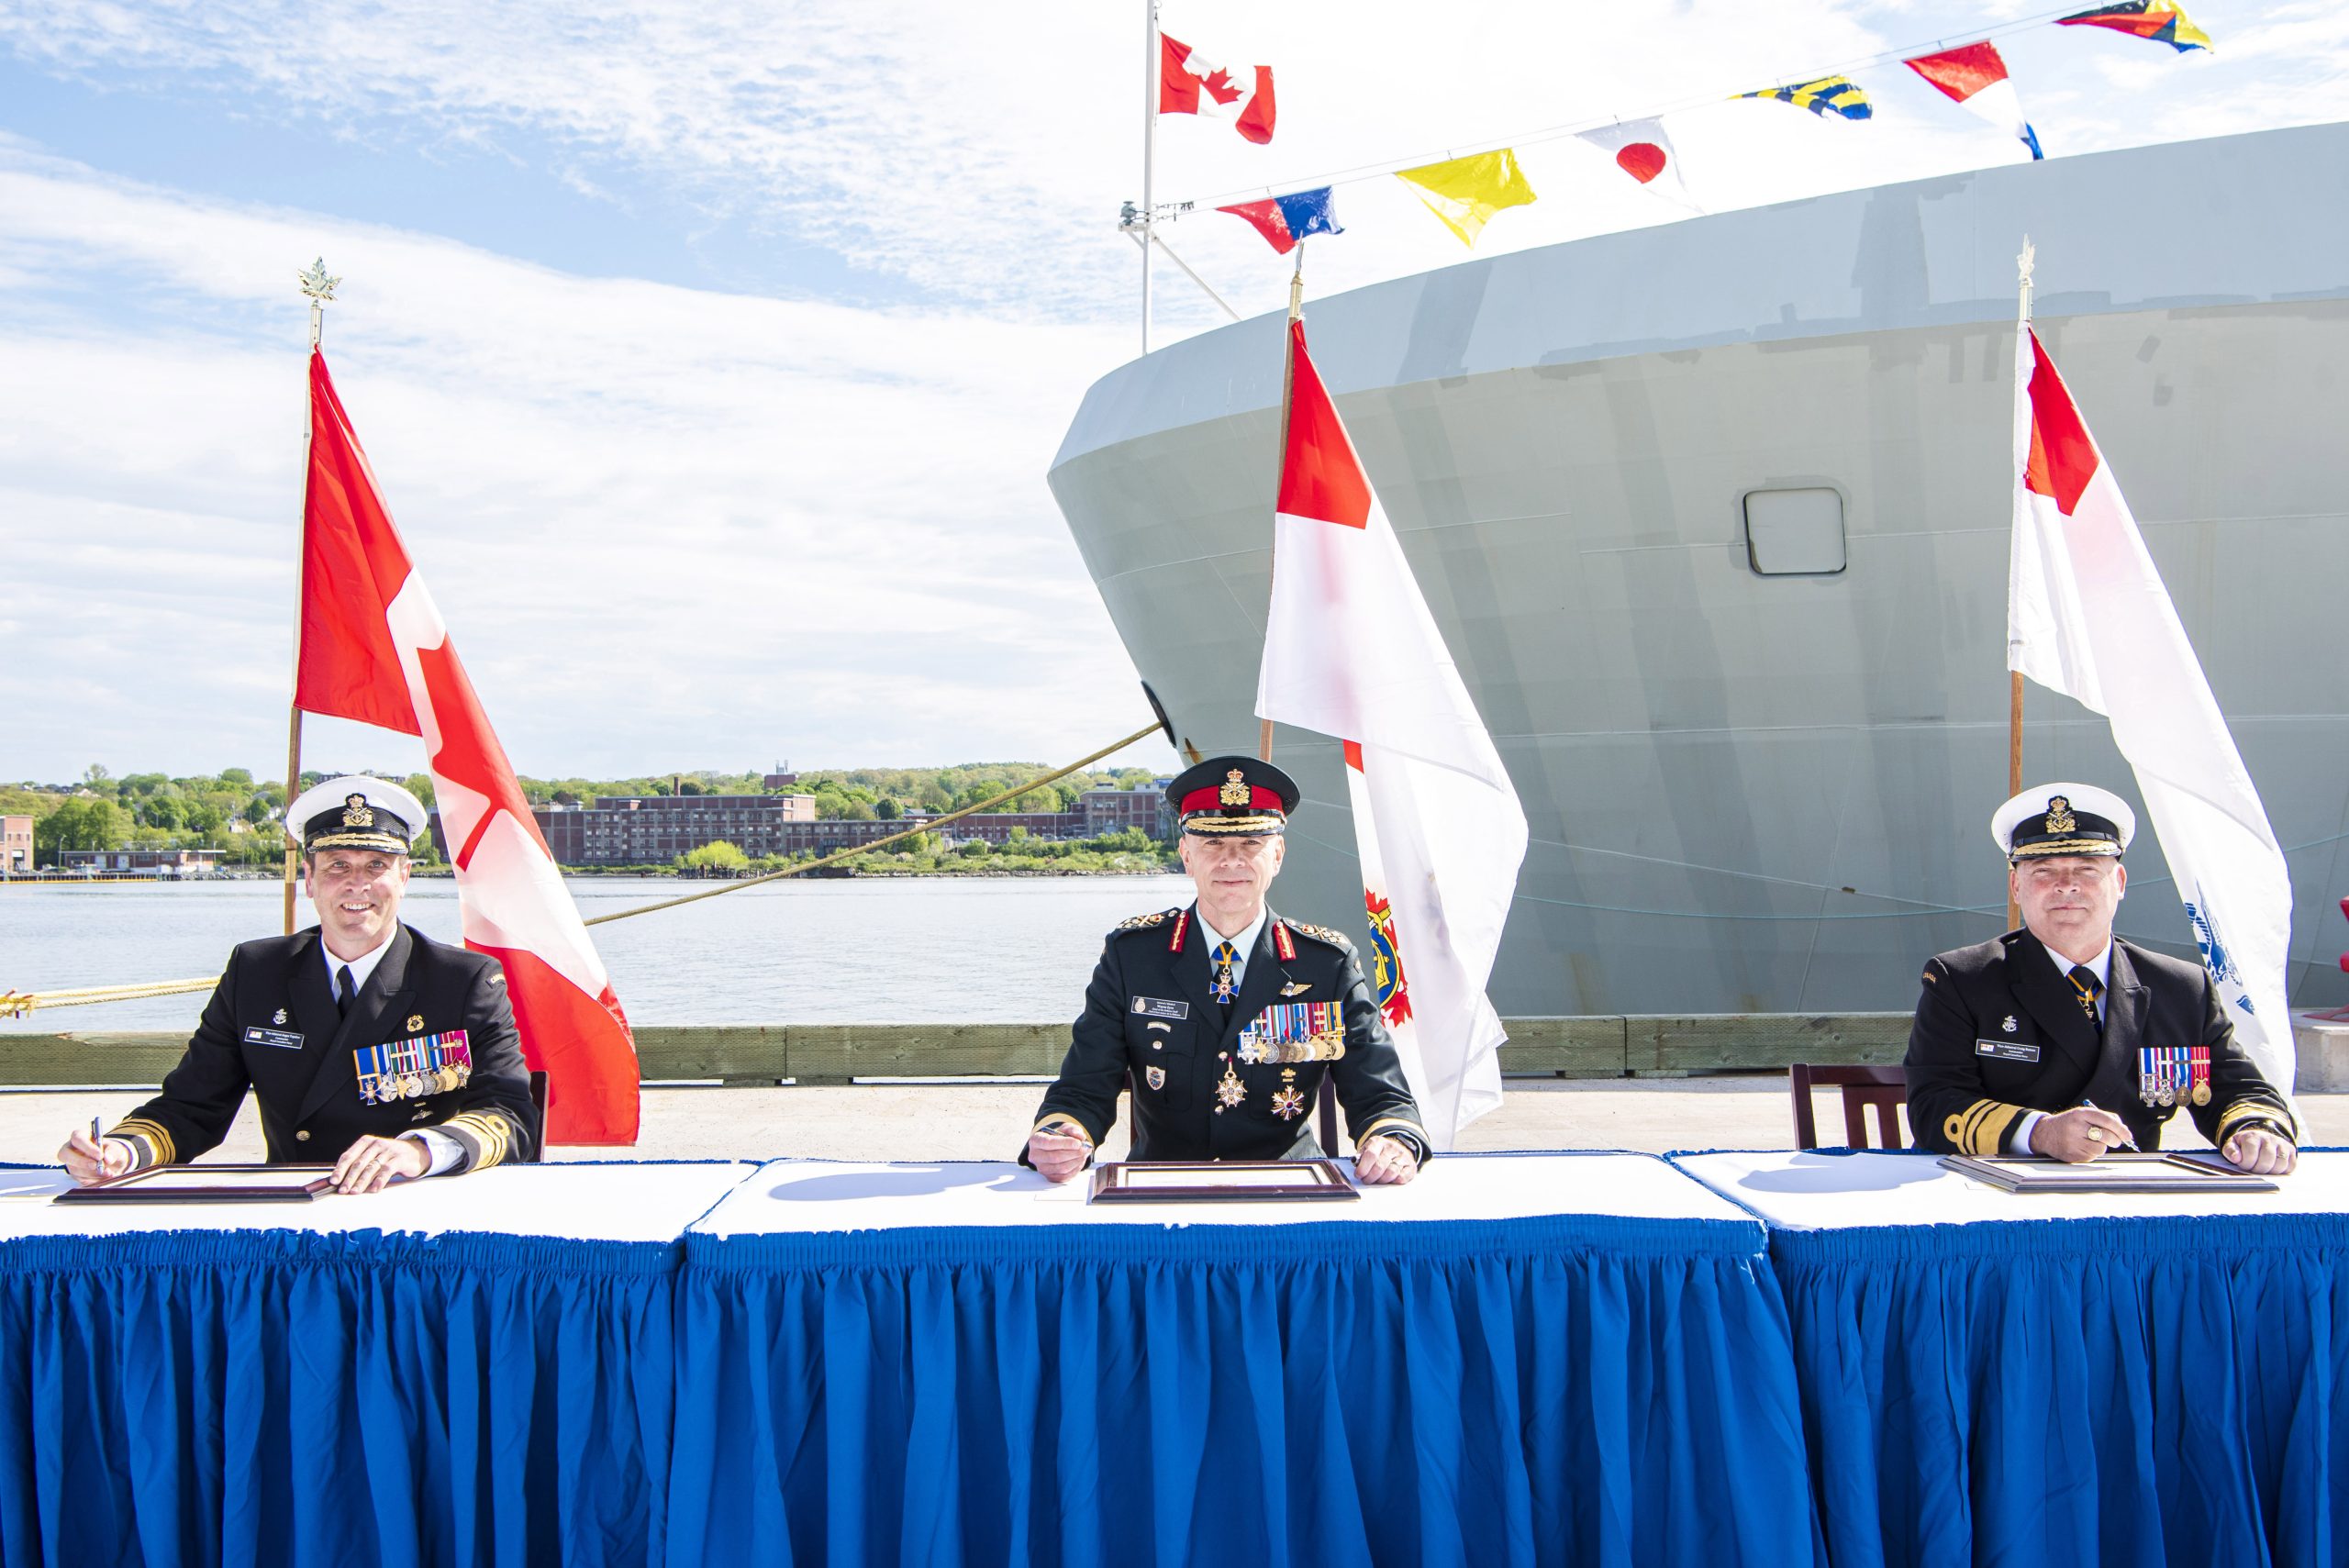 New Commander for the Royal Canadian Navy